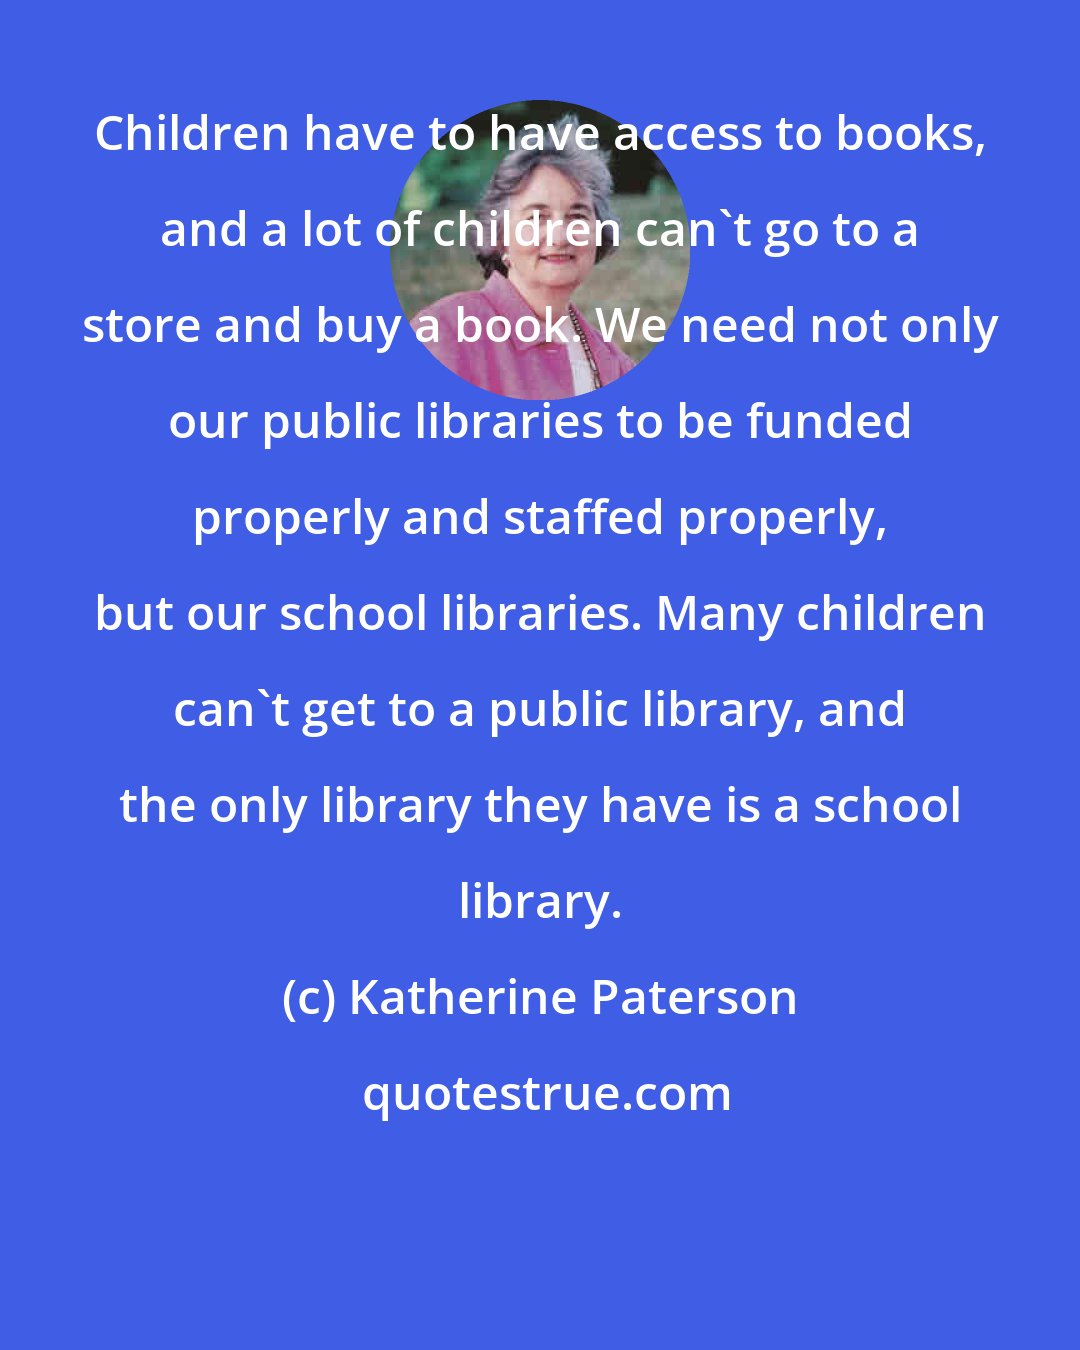 Katherine Paterson: Children have to have access to books, and a lot of children can't go to a store and buy a book. We need not only our public libraries to be funded properly and staffed properly, but our school libraries. Many children can't get to a public library, and the only library they have is a school library.